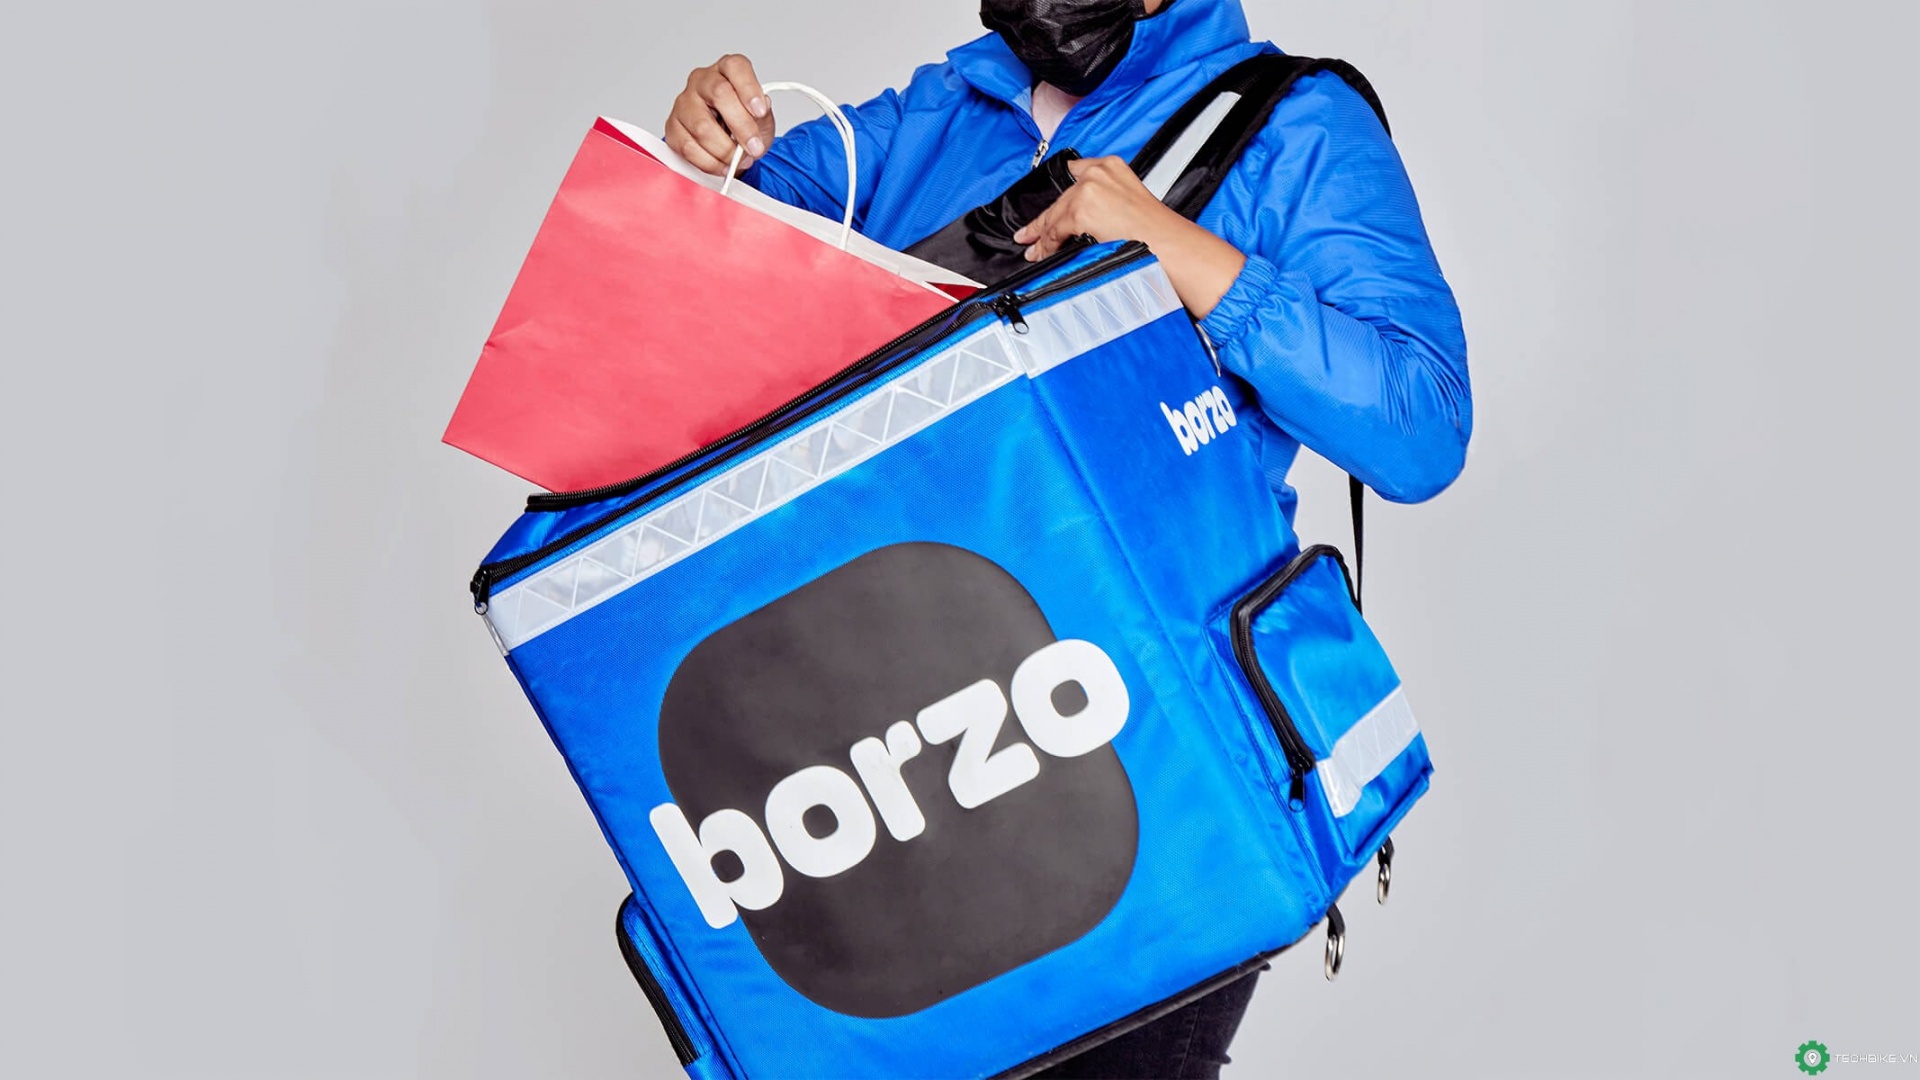 International delivery company Borzo increases footprint in Vietnam